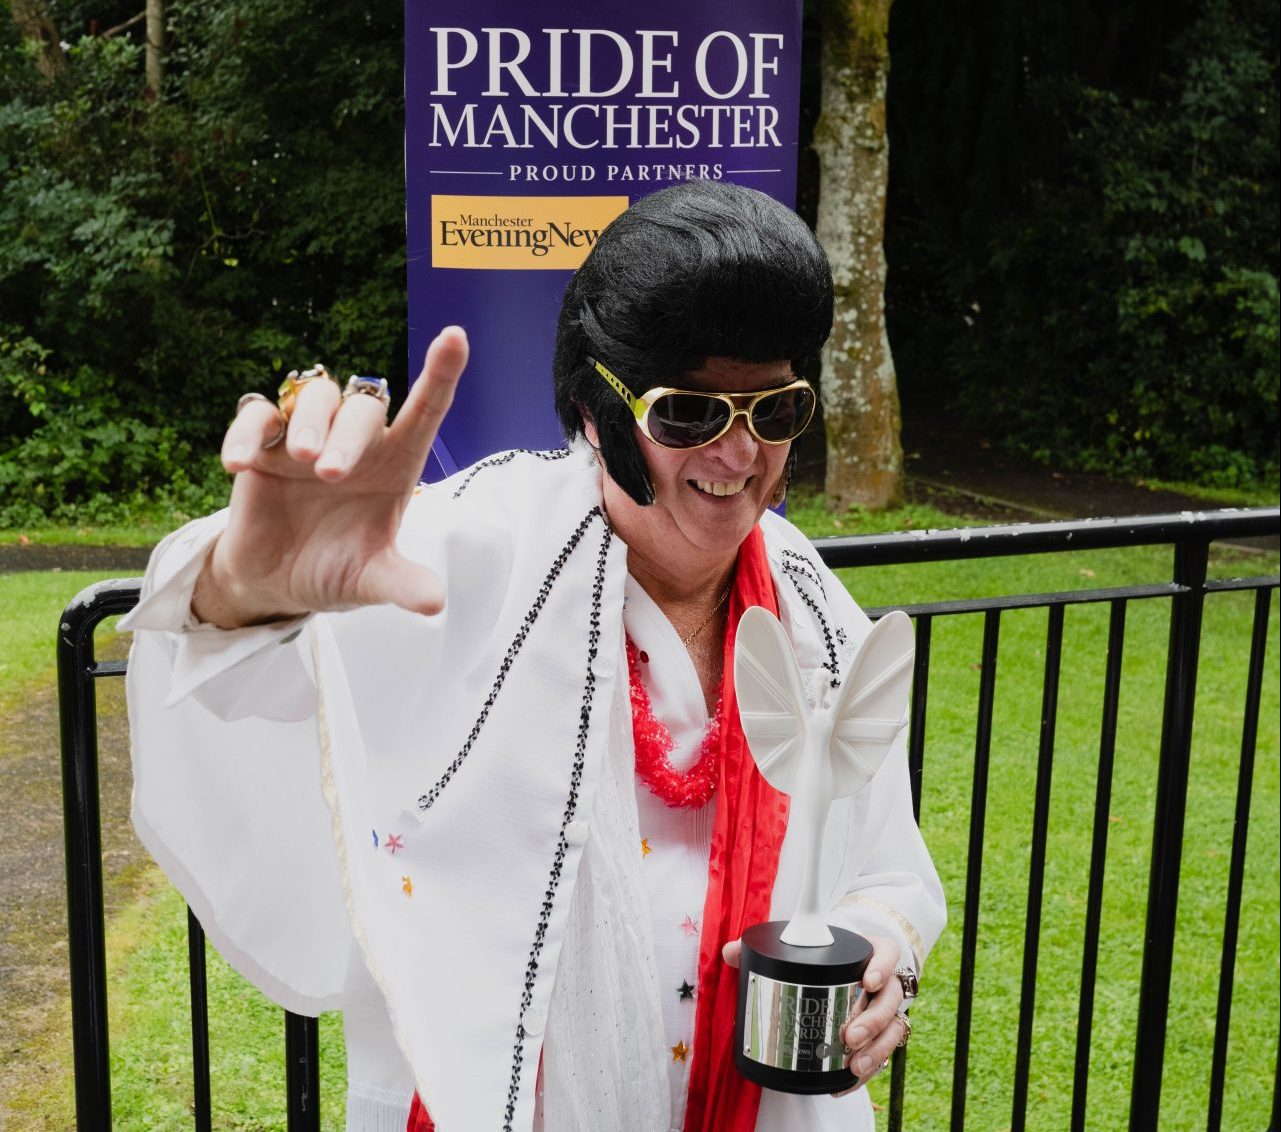 Jim Nicholas as Elvis with Pride of Manchester trophy